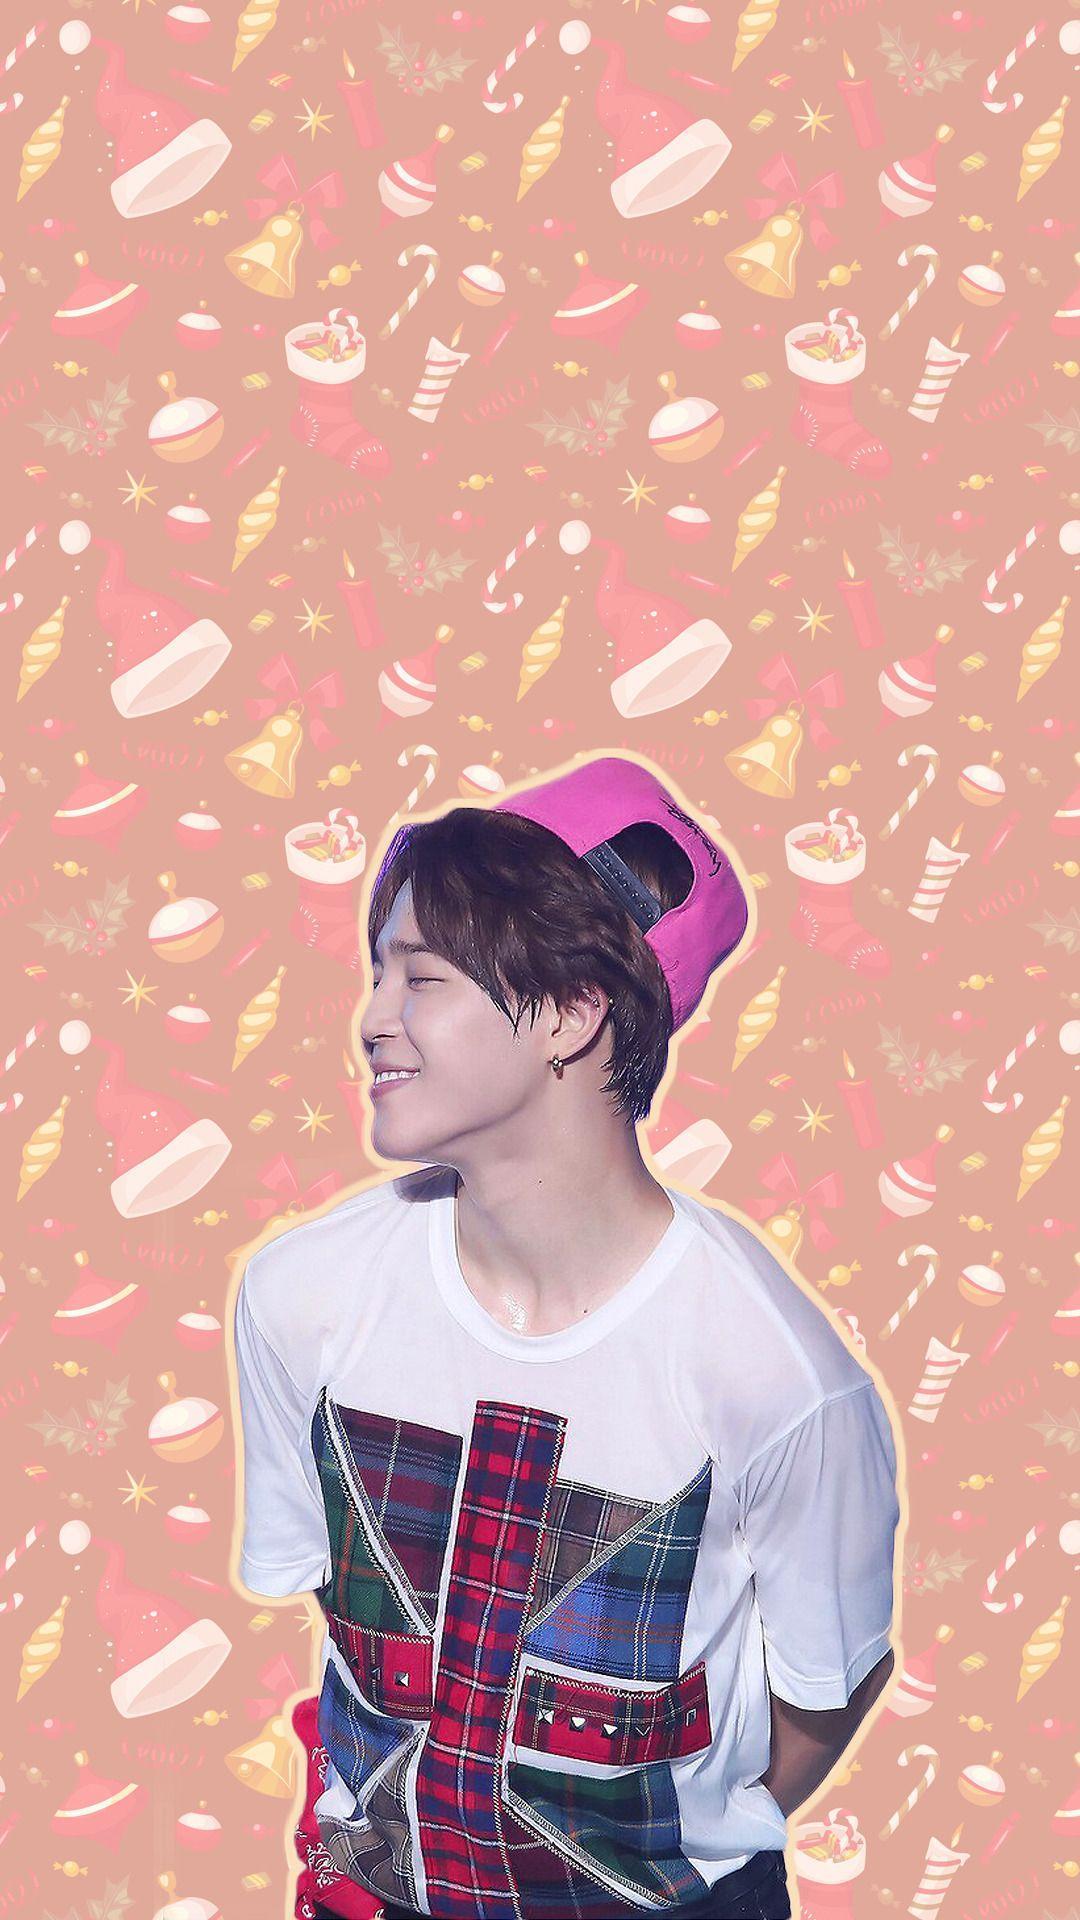 ✧・ﾟ: *✧・ﾟ:*, JIMIN CHRISTMAS WALLPAPERS 1080x1920px please